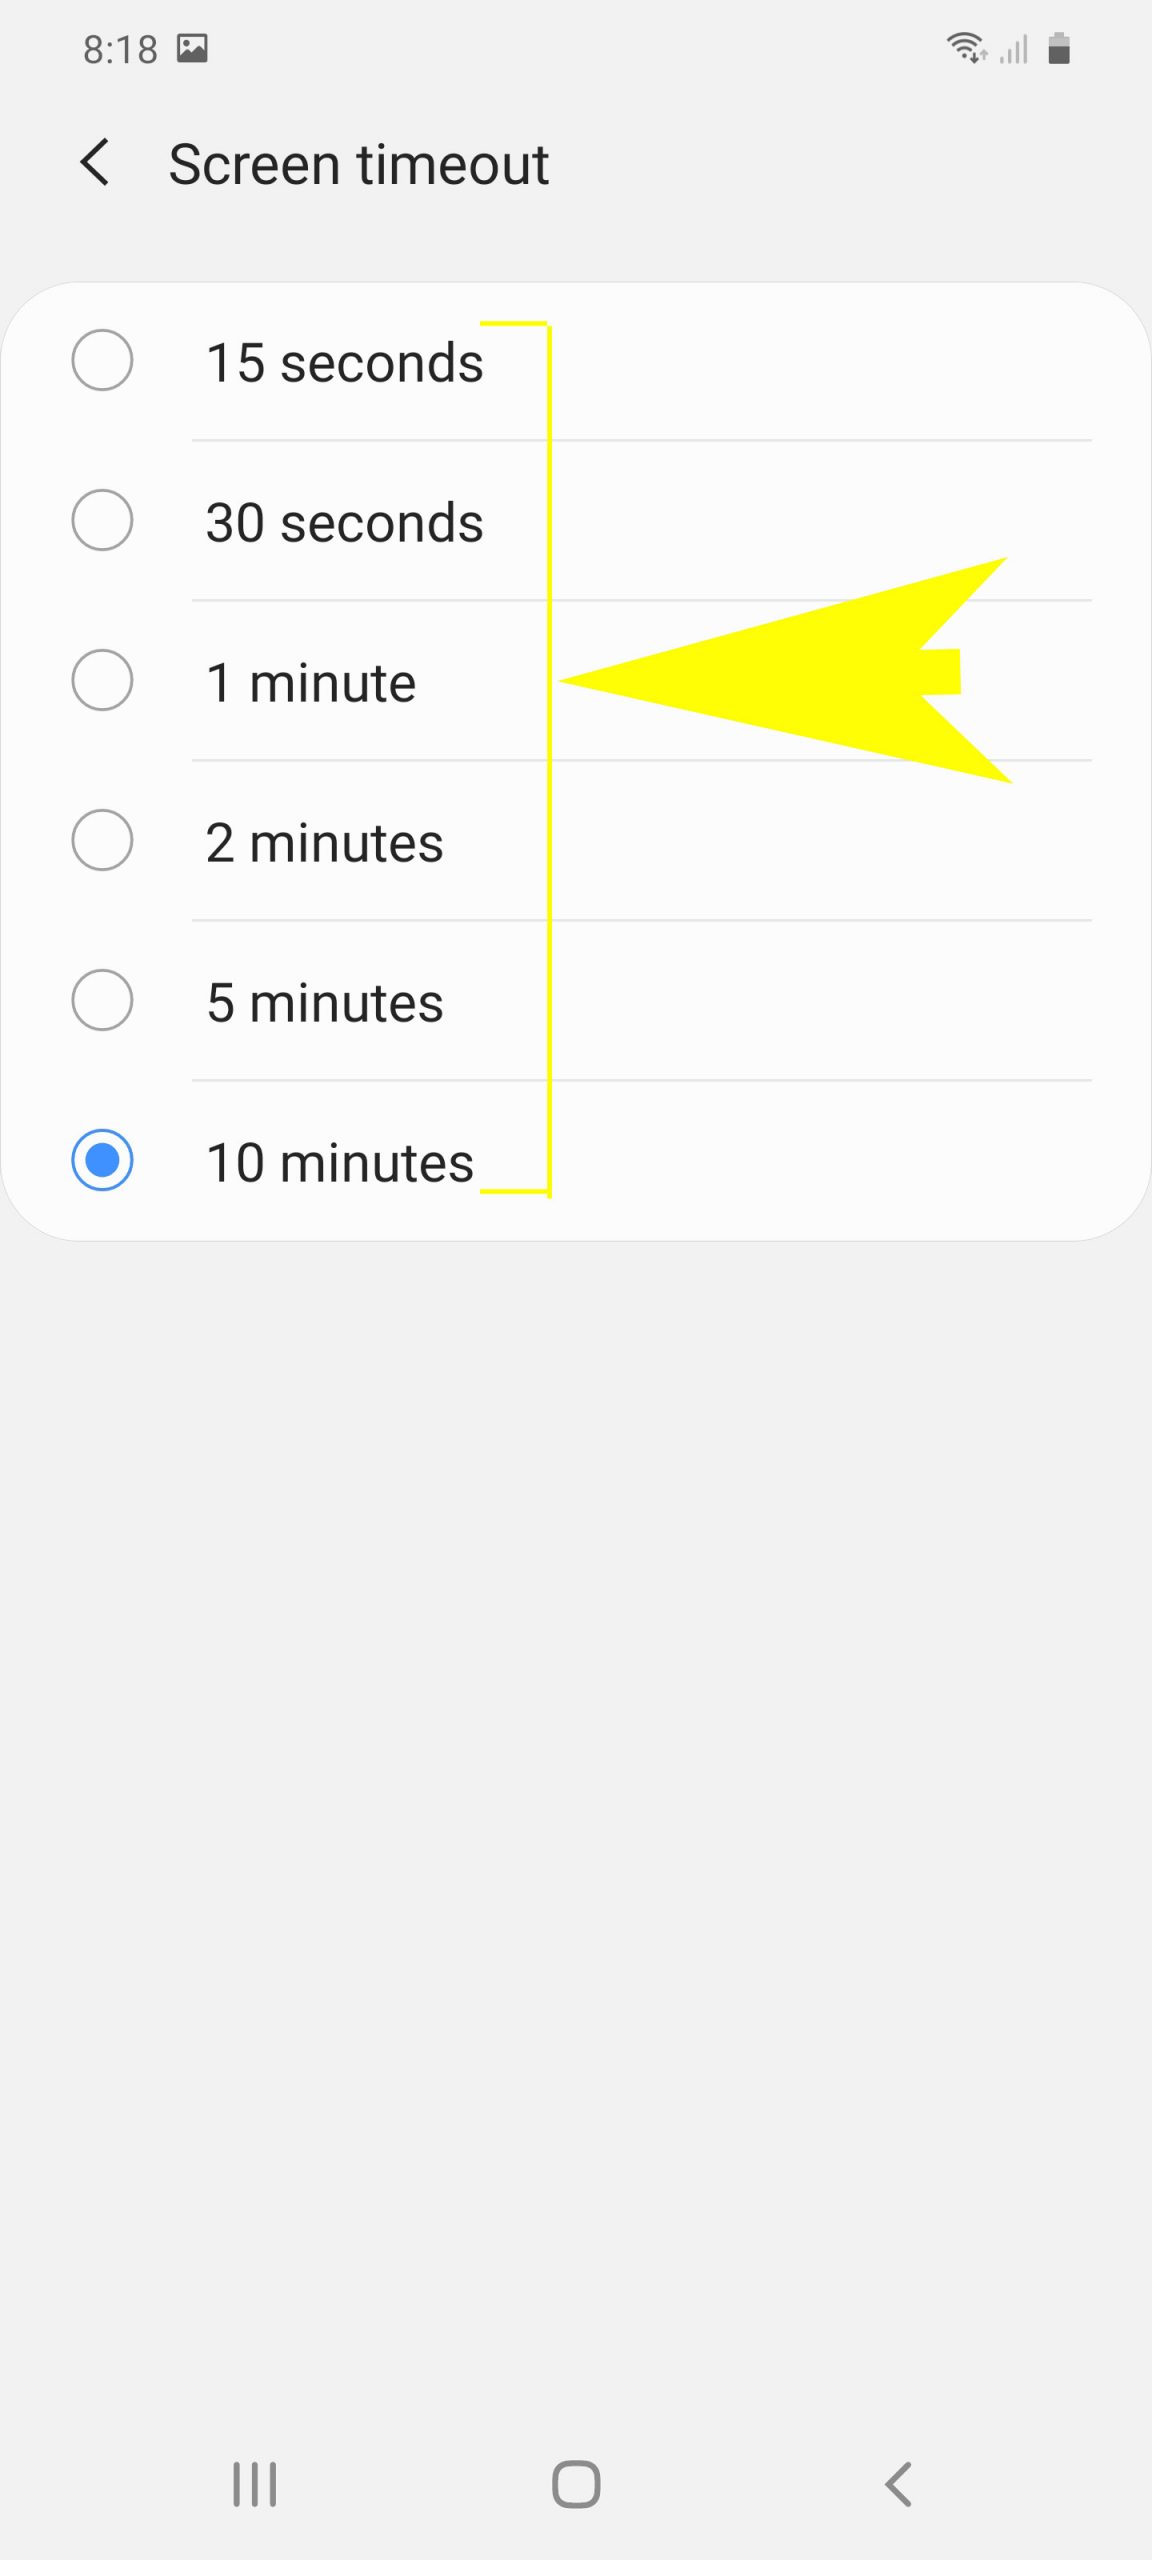 galaxy s20 screen timeout and brightness - idle time